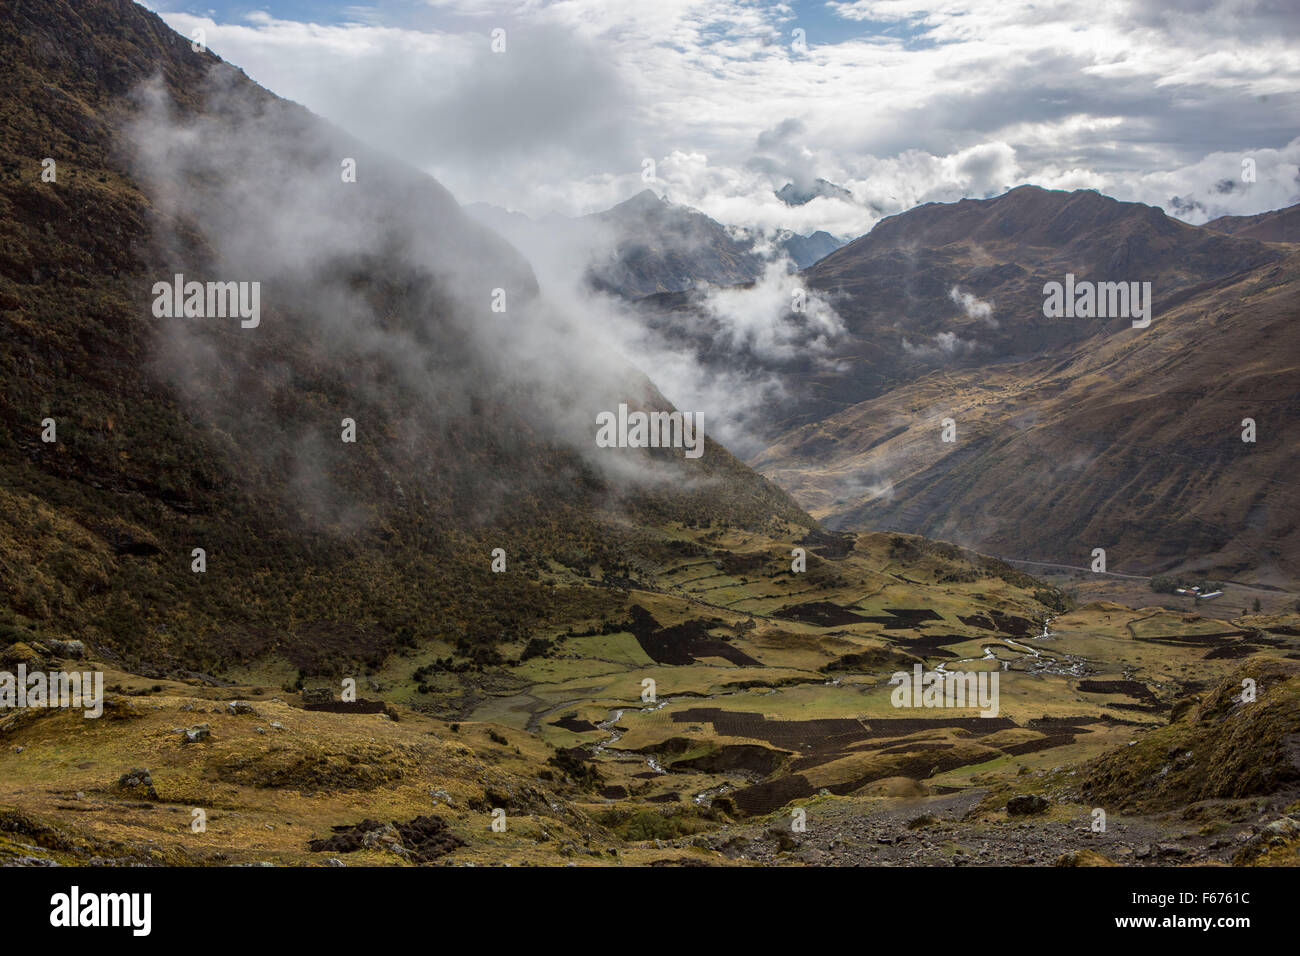 The Lares District of Peru. Lares District is one of eight districts of the province Calca in Peru. Stock Photo